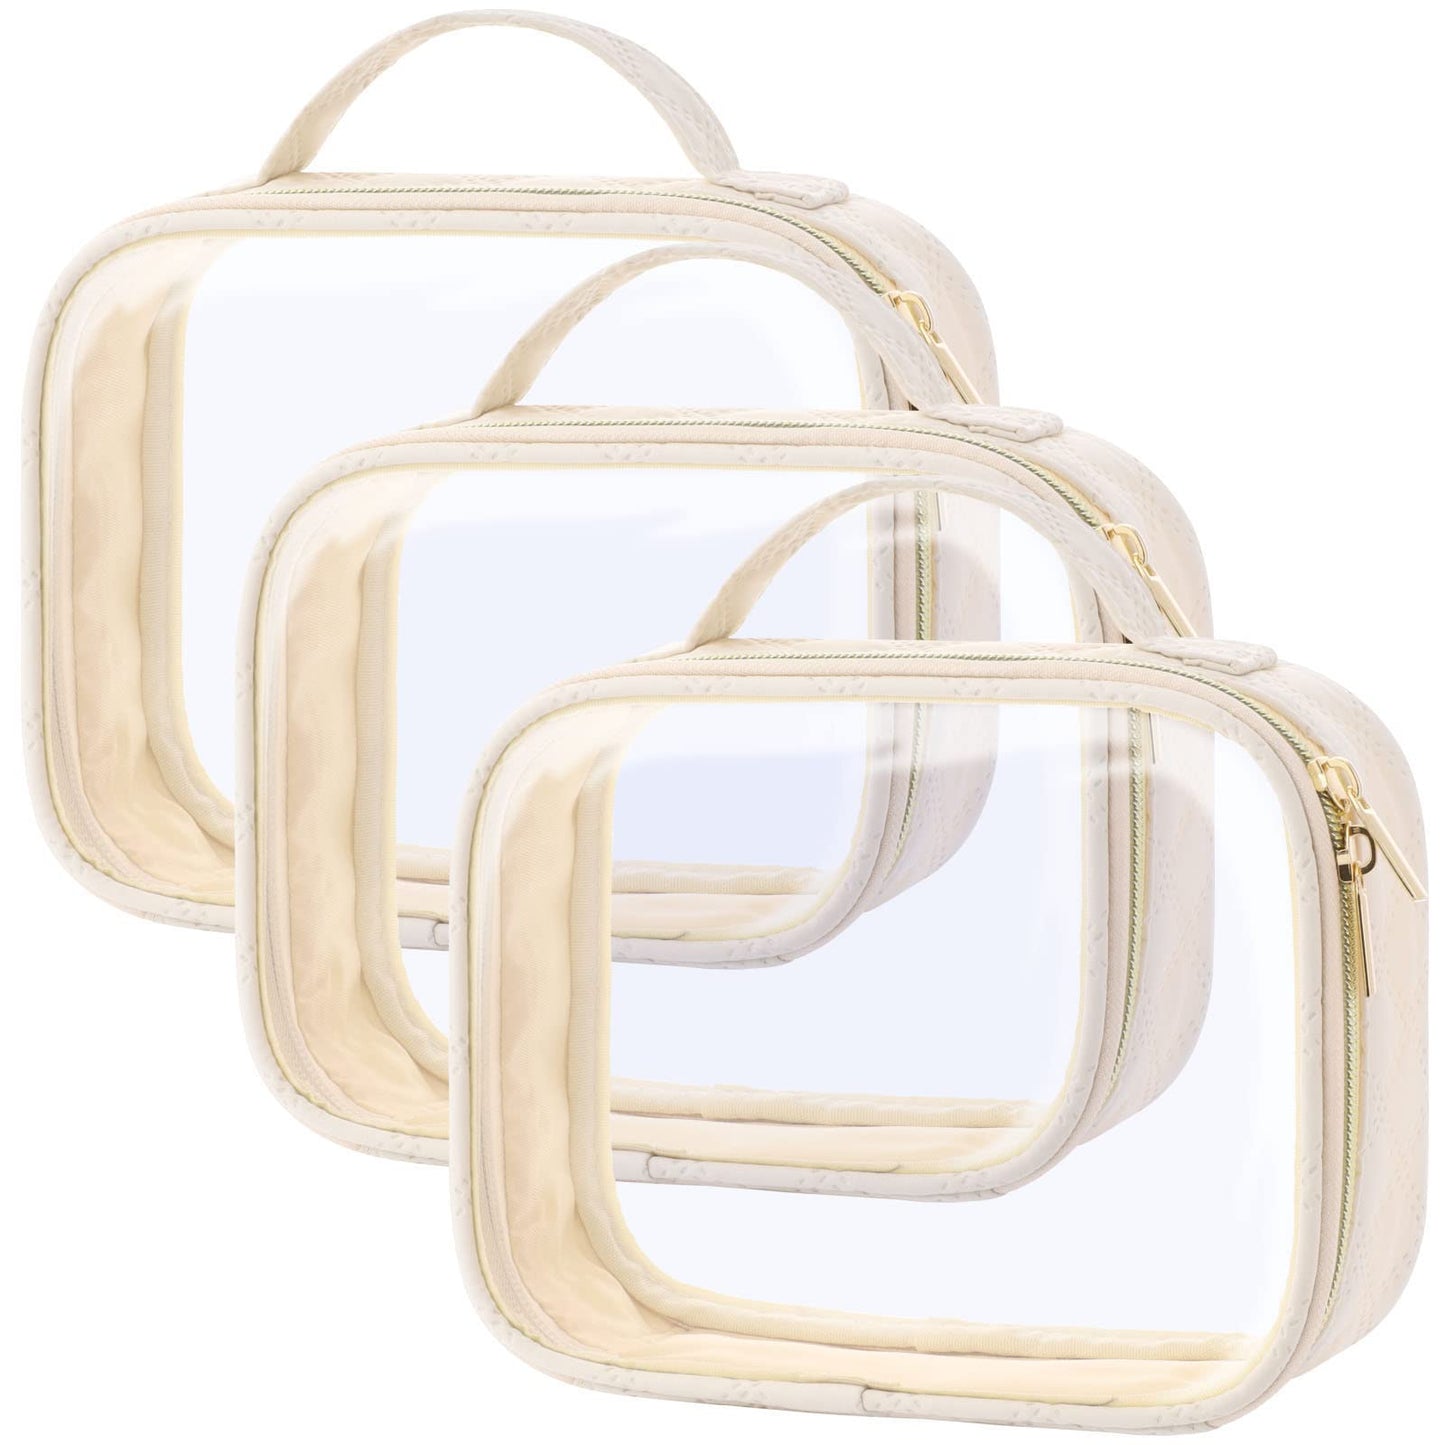 PACKISM Clear TSA-approved Toiletry Bags For Traveller